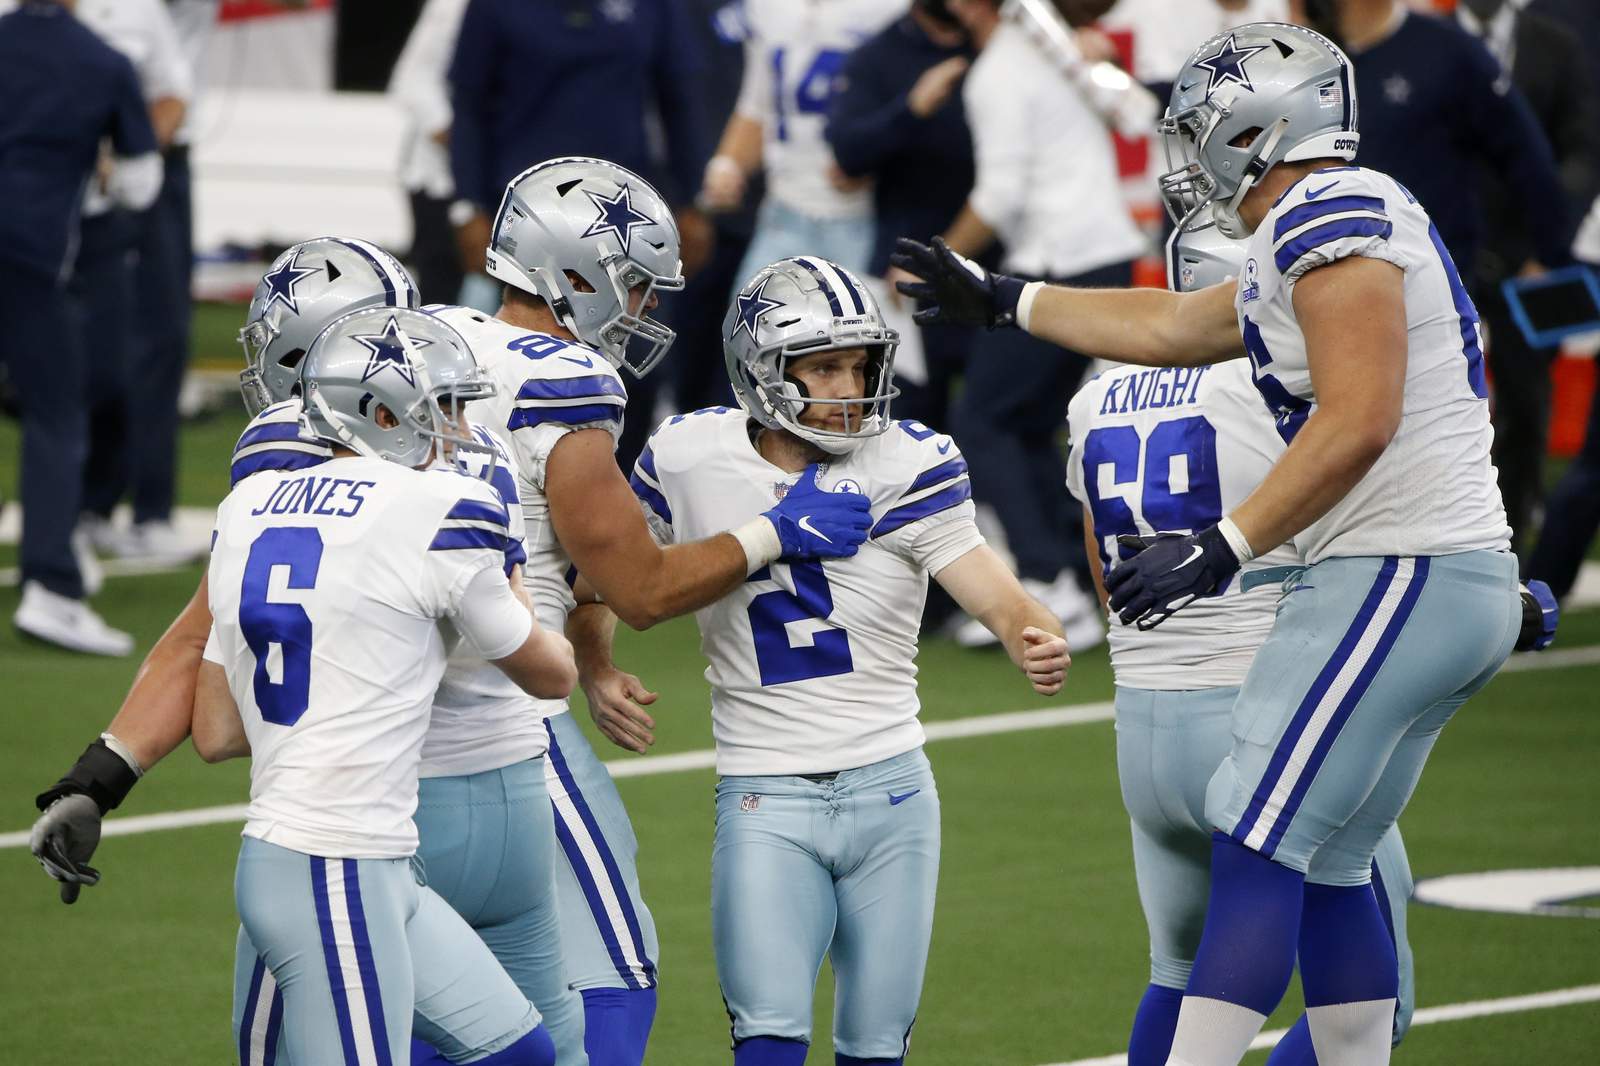 Cowboys' rally stuns Falcons 40-39 in McCarthy’s home debut